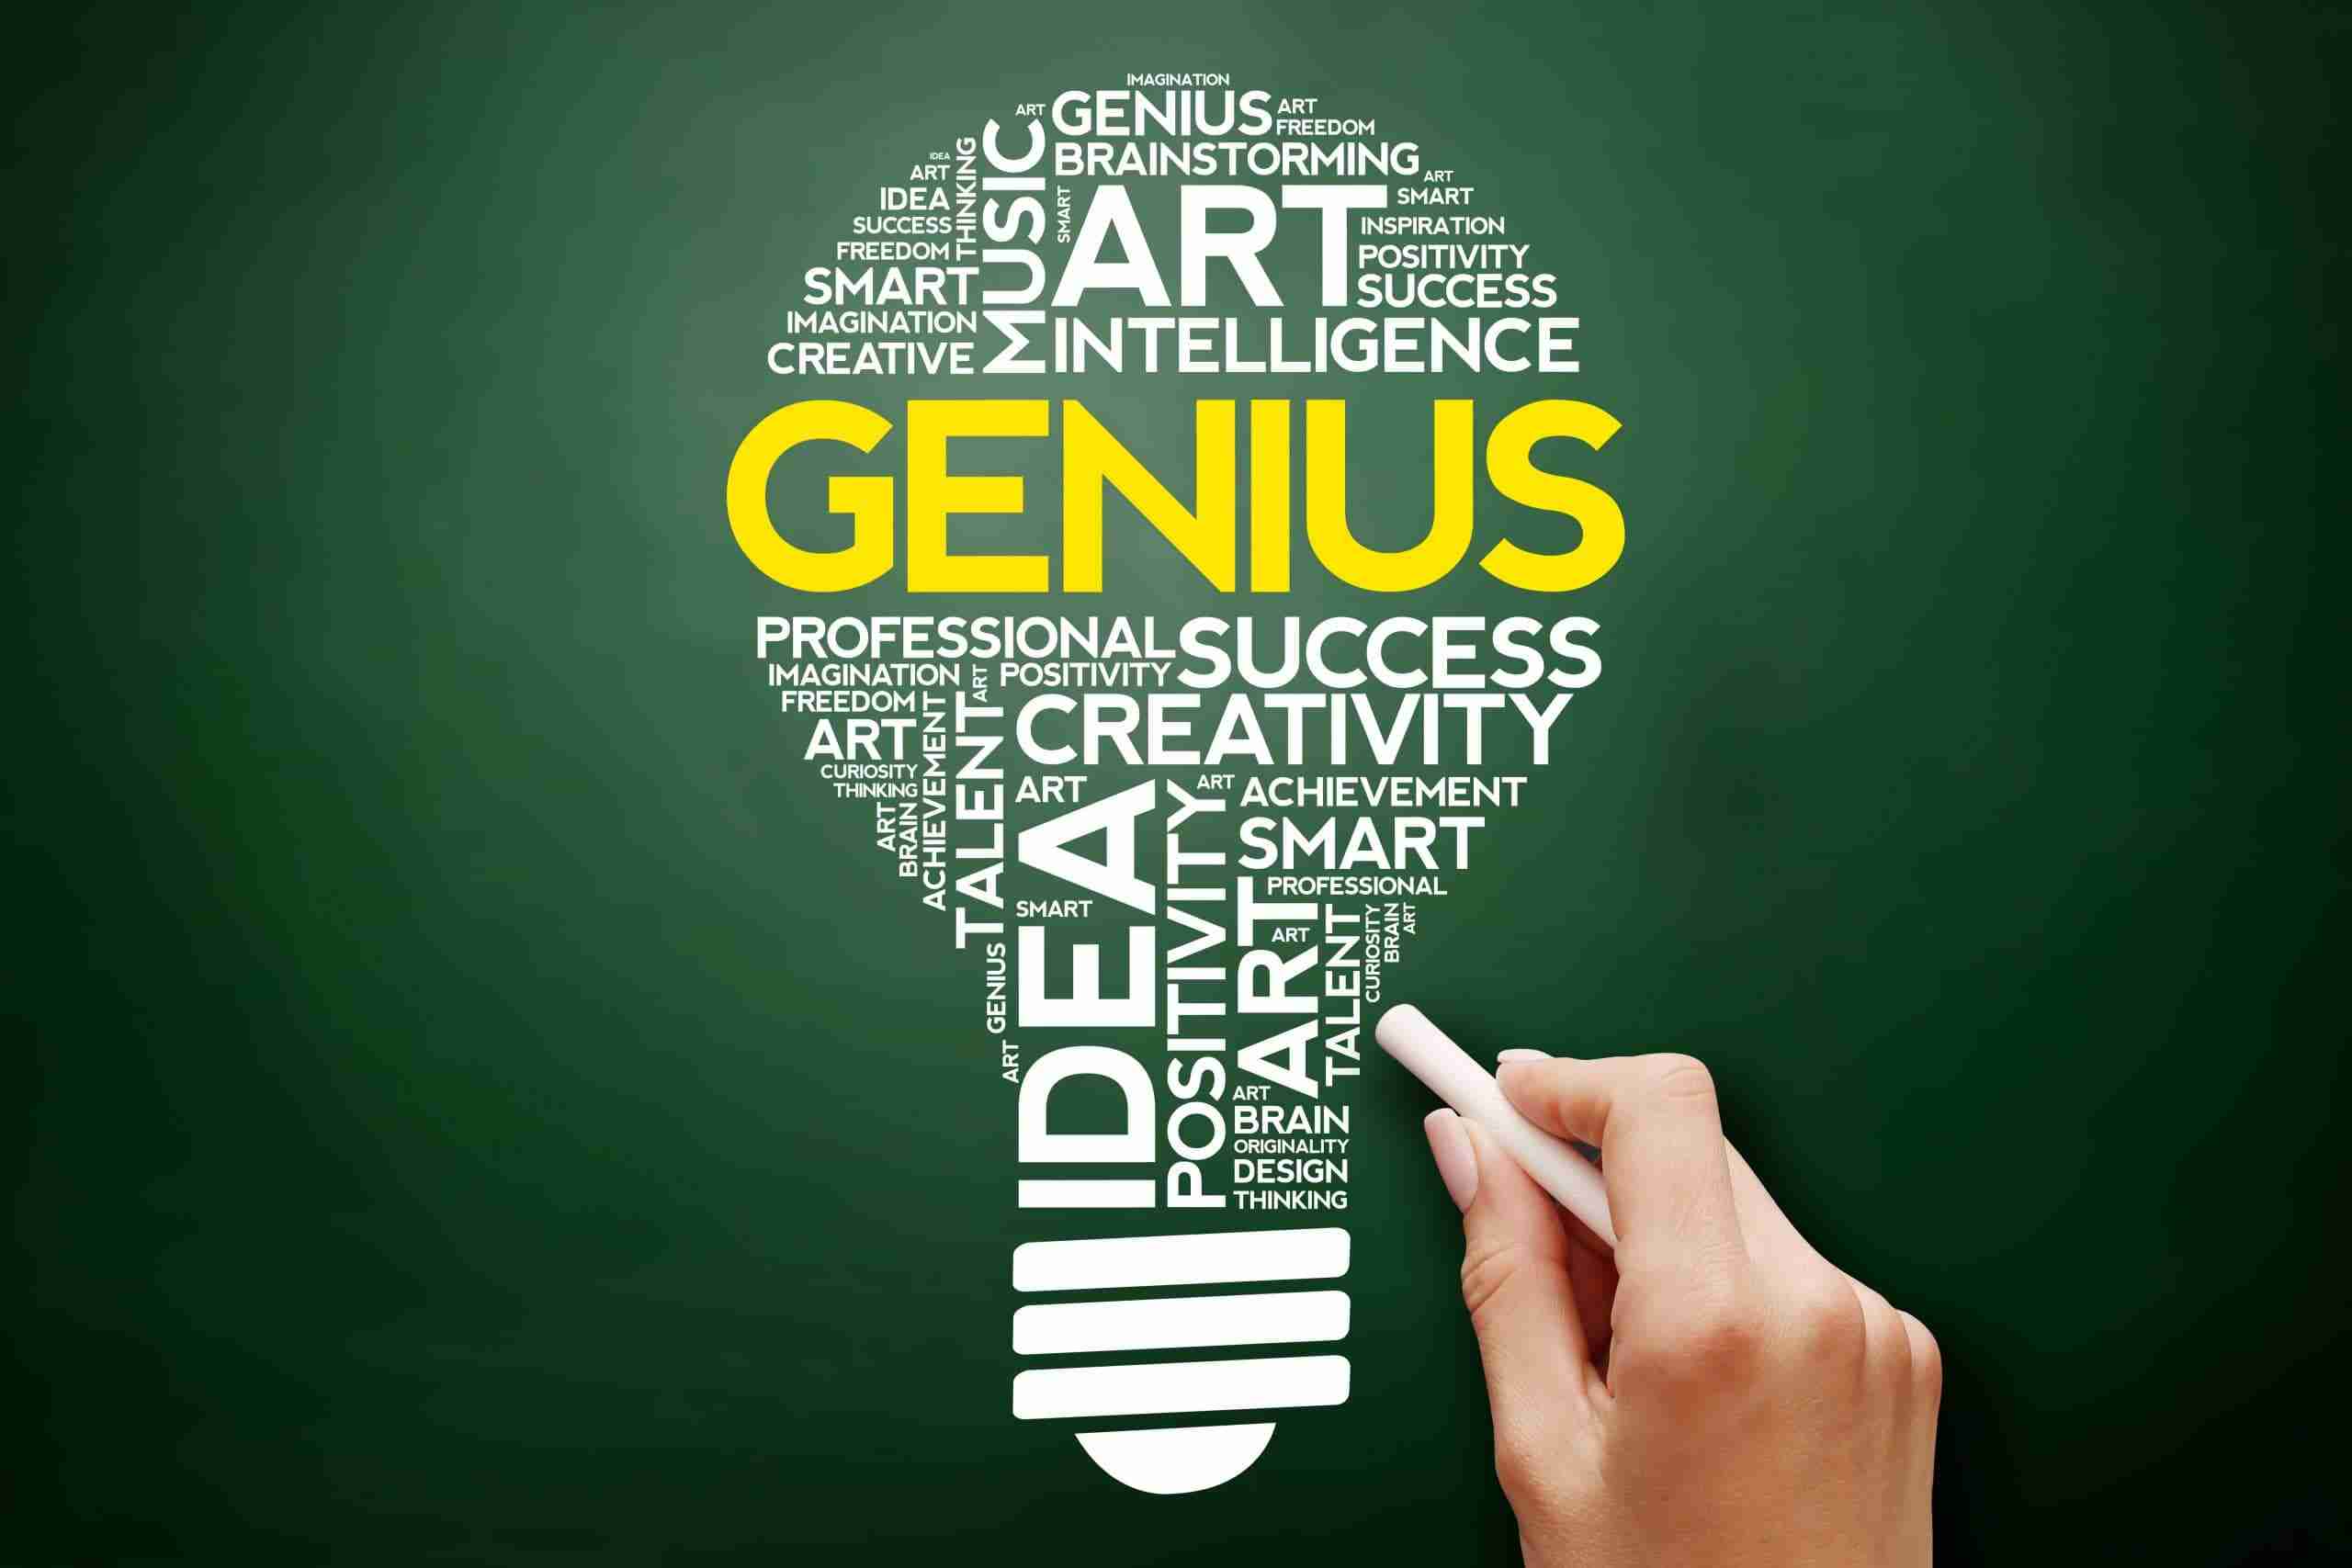 Genius Activator(TM) is a signature process to bring out your inner greatness